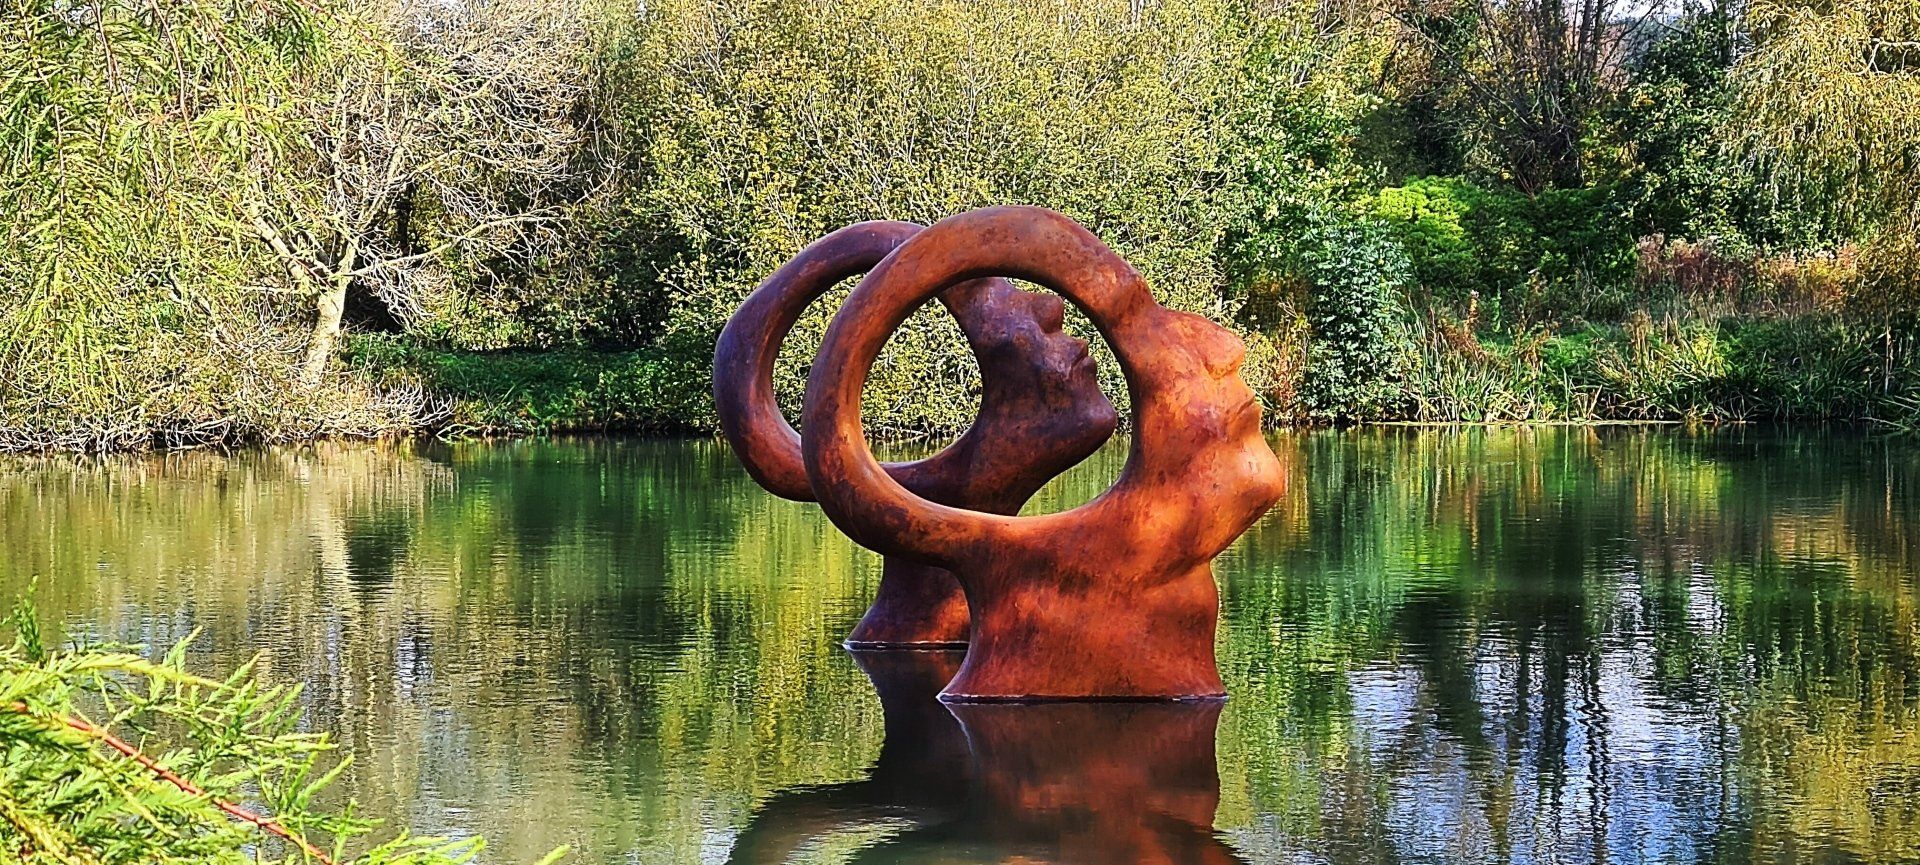 Sculpture by the Lakes in Dorset